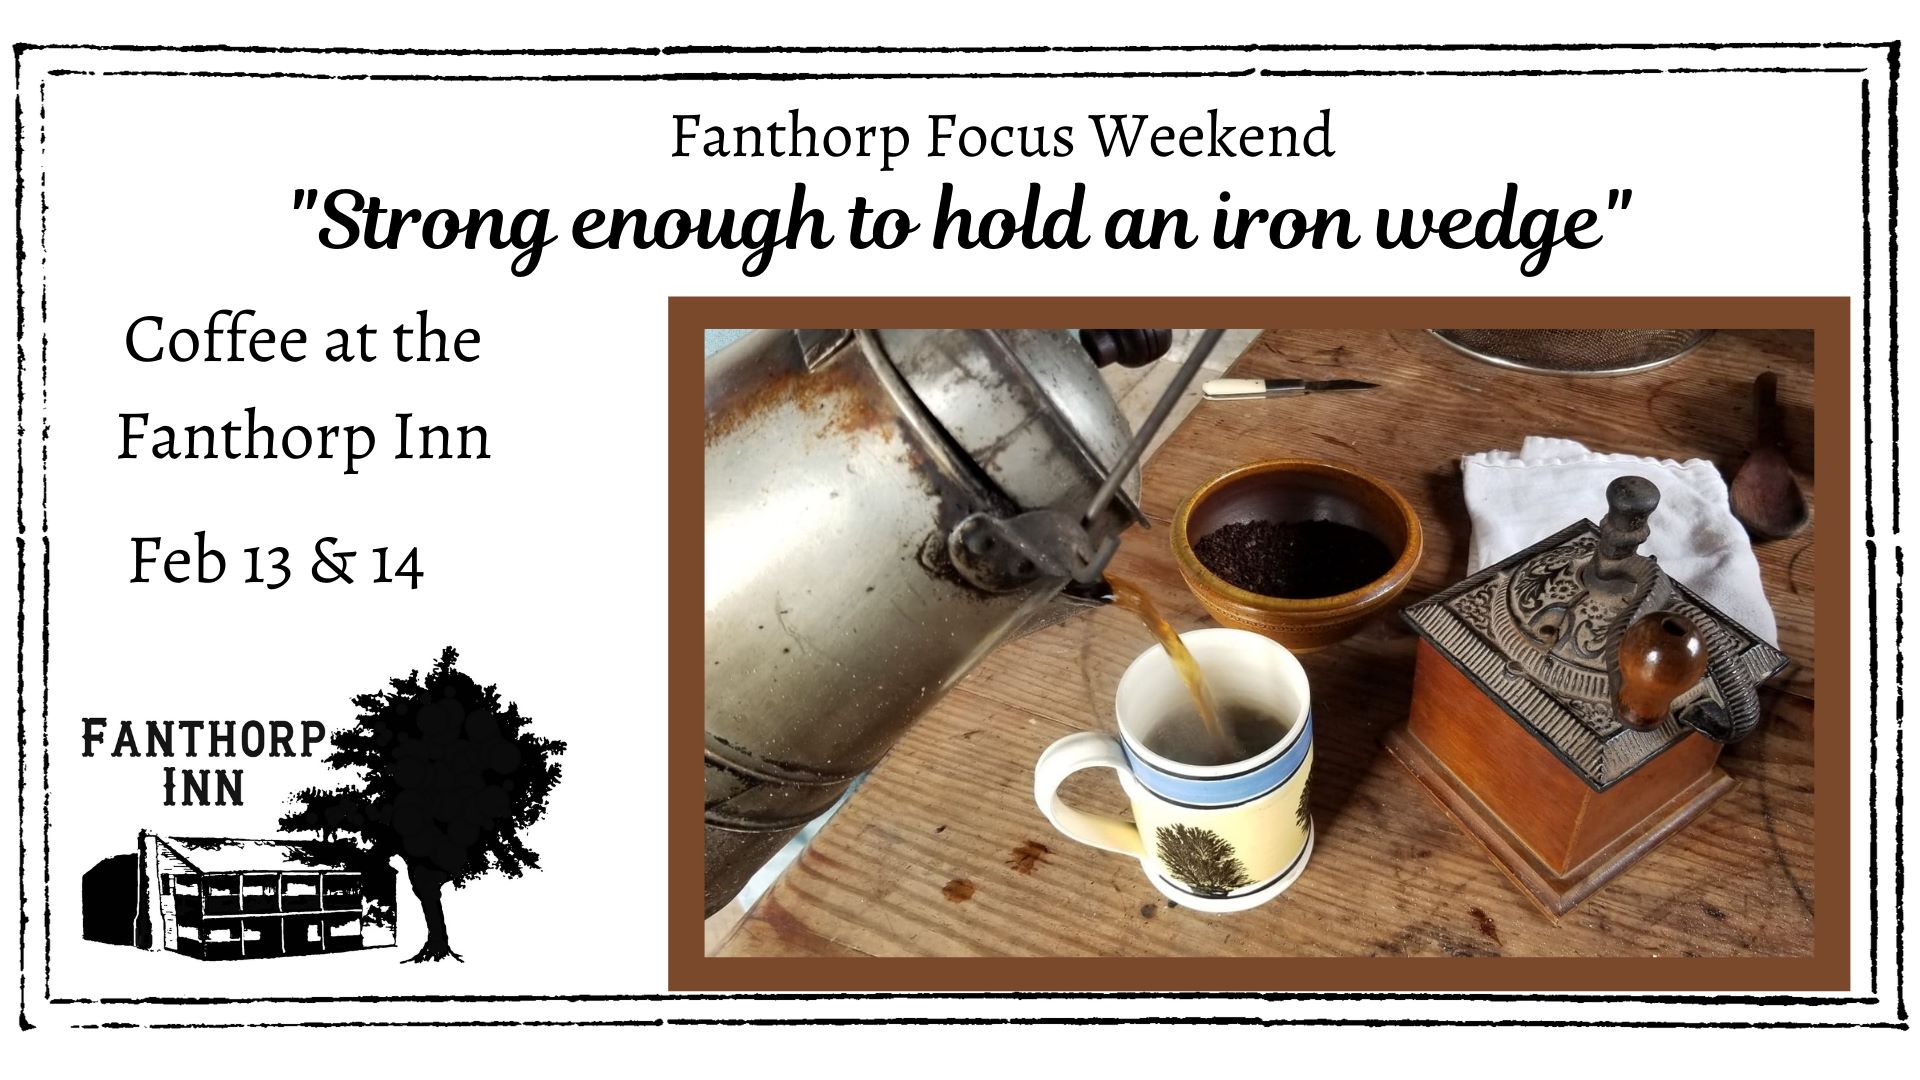 Fanthorp Focus Weekend: Coffee at the Fanthorp Inn